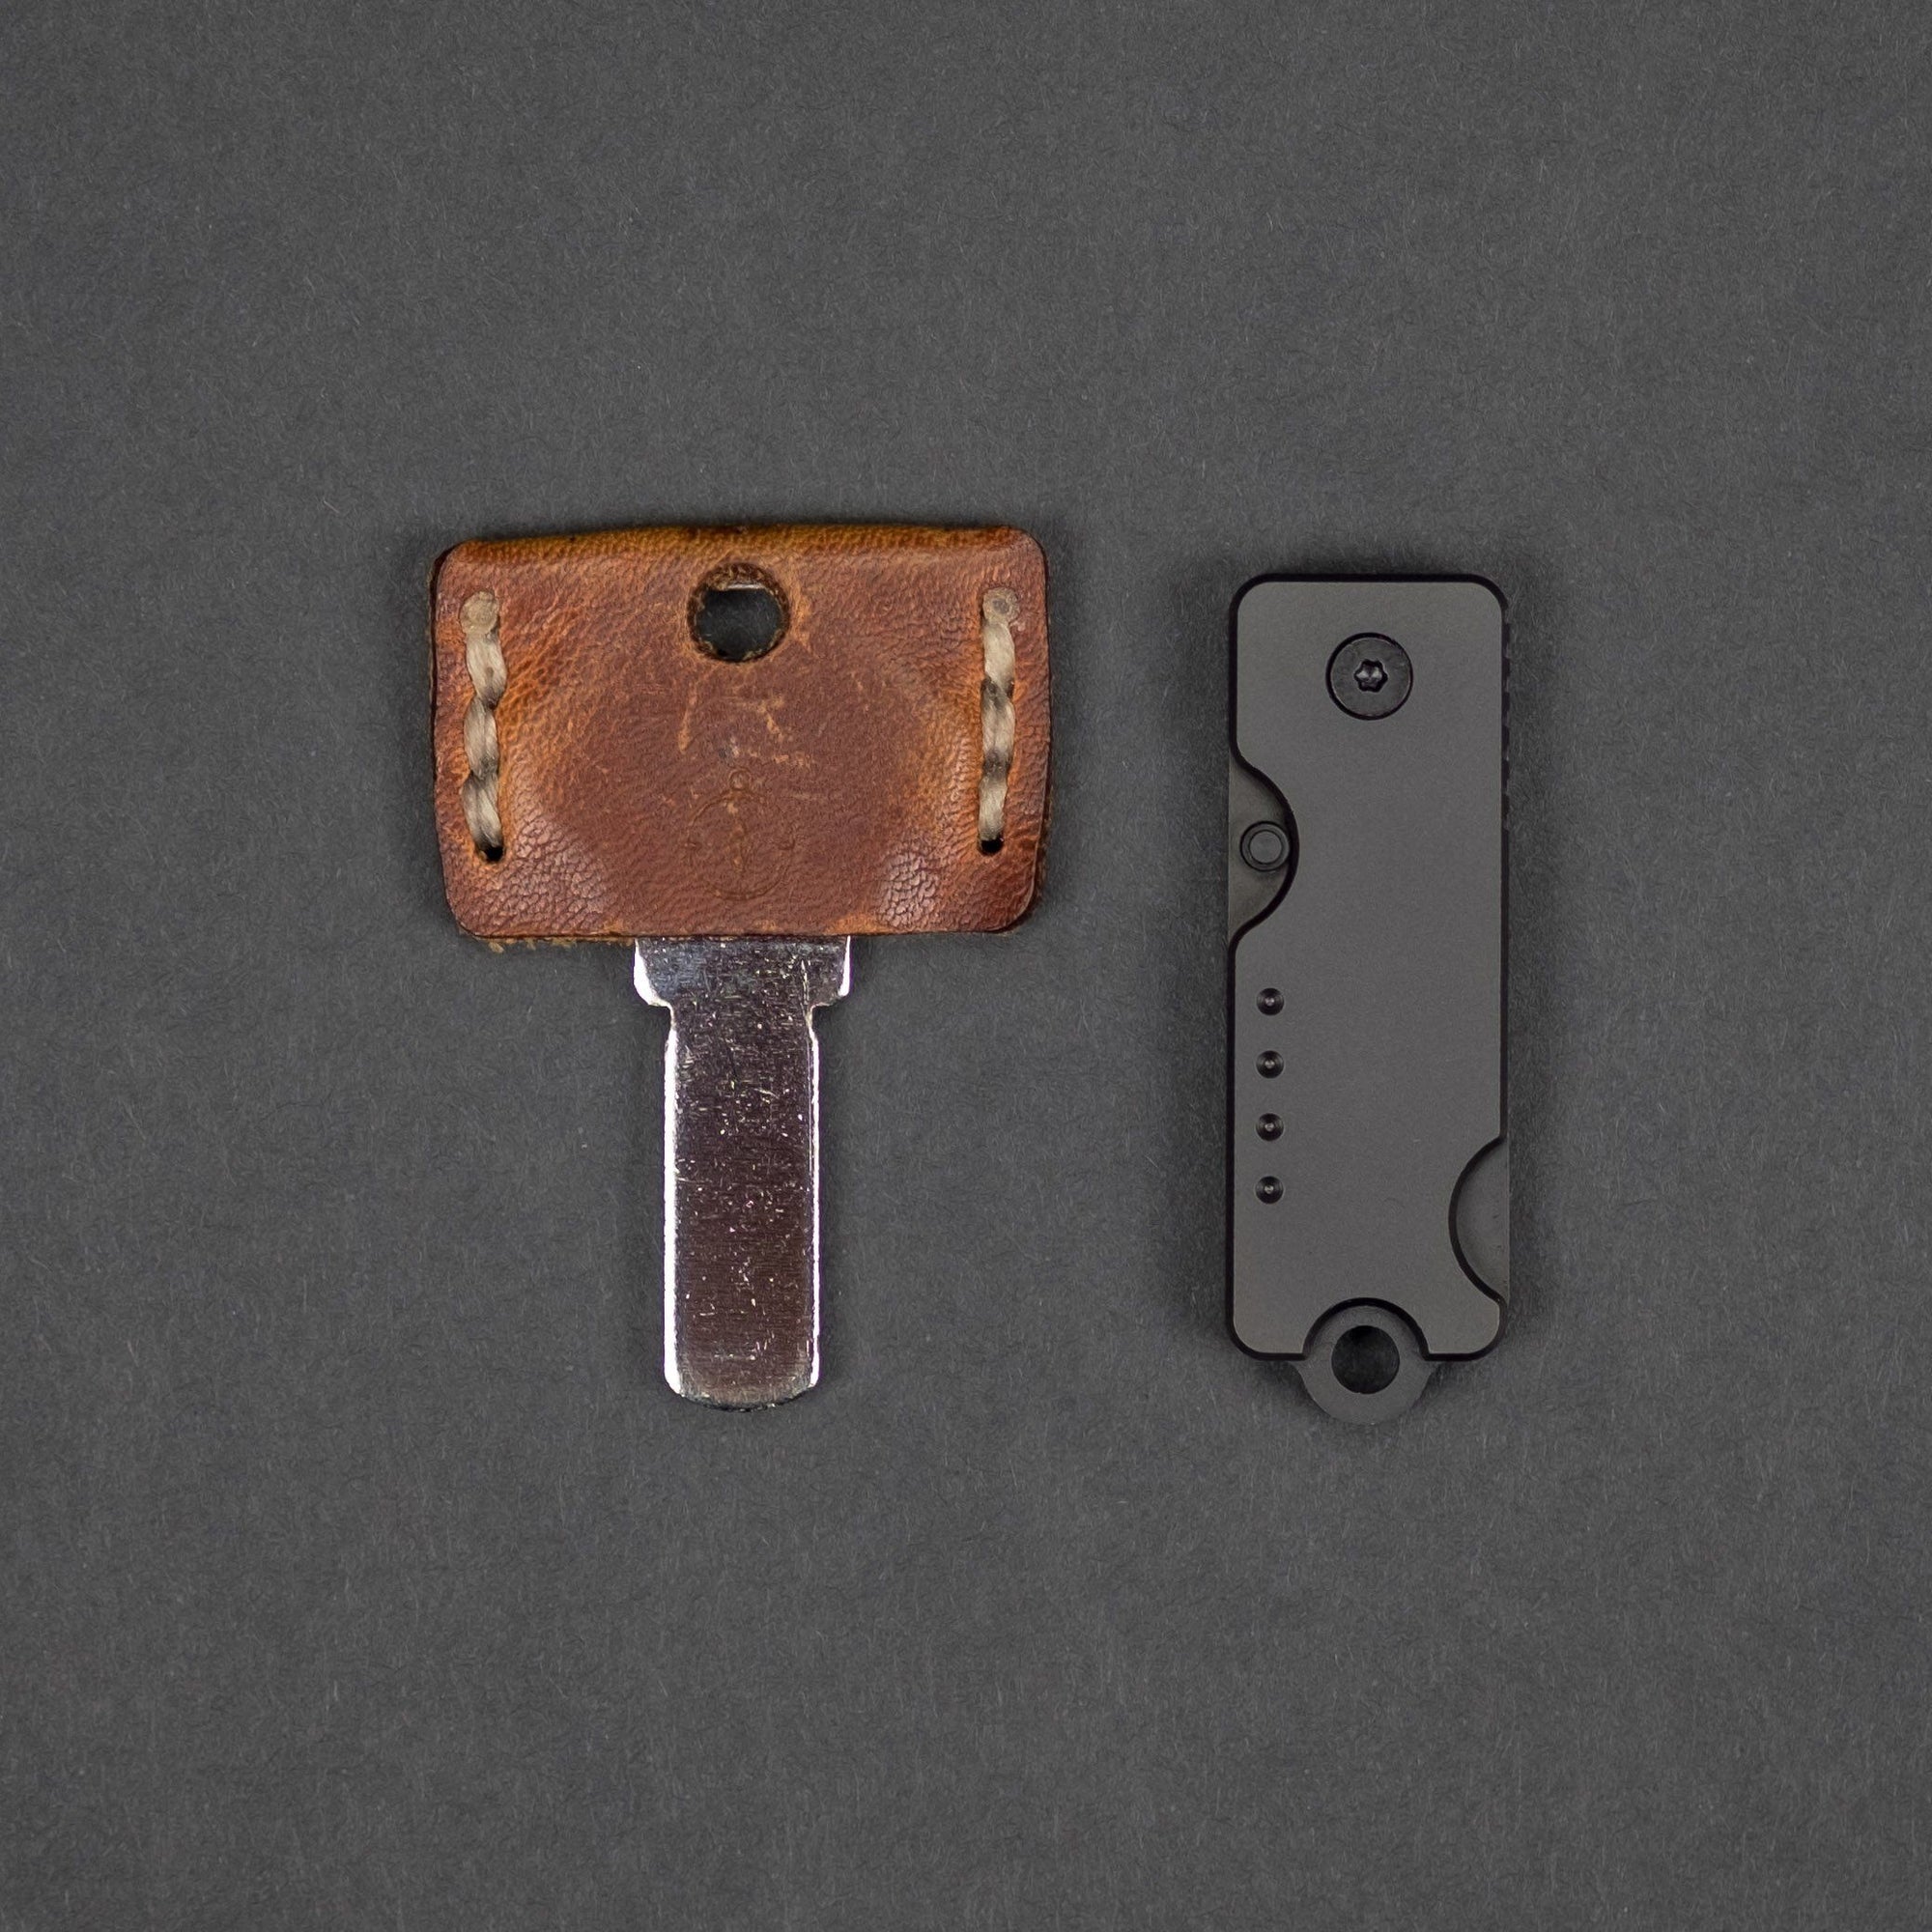 The UltimateTitanium Keychain Knife - for Everyday Carry by Bryce